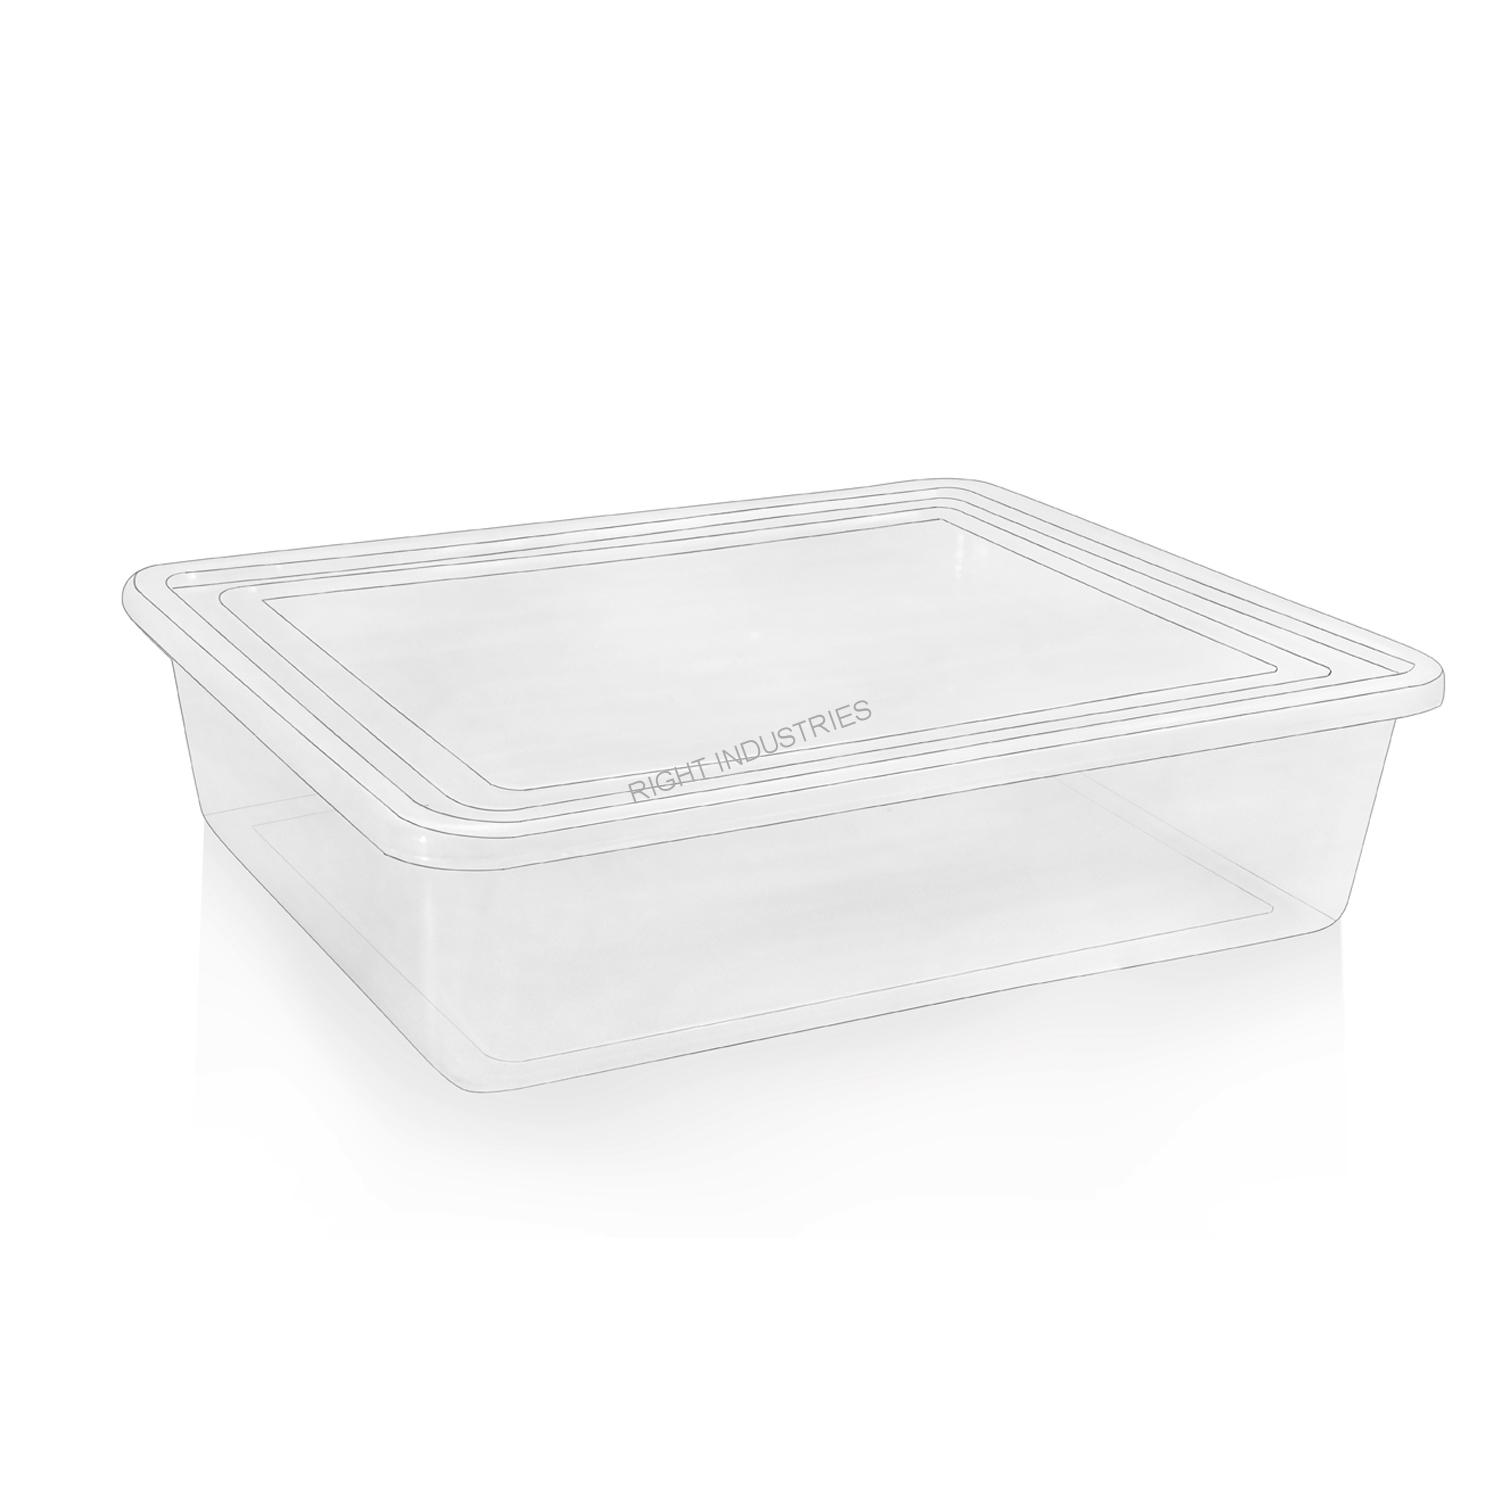 plastic container manufacturer  Right Industries